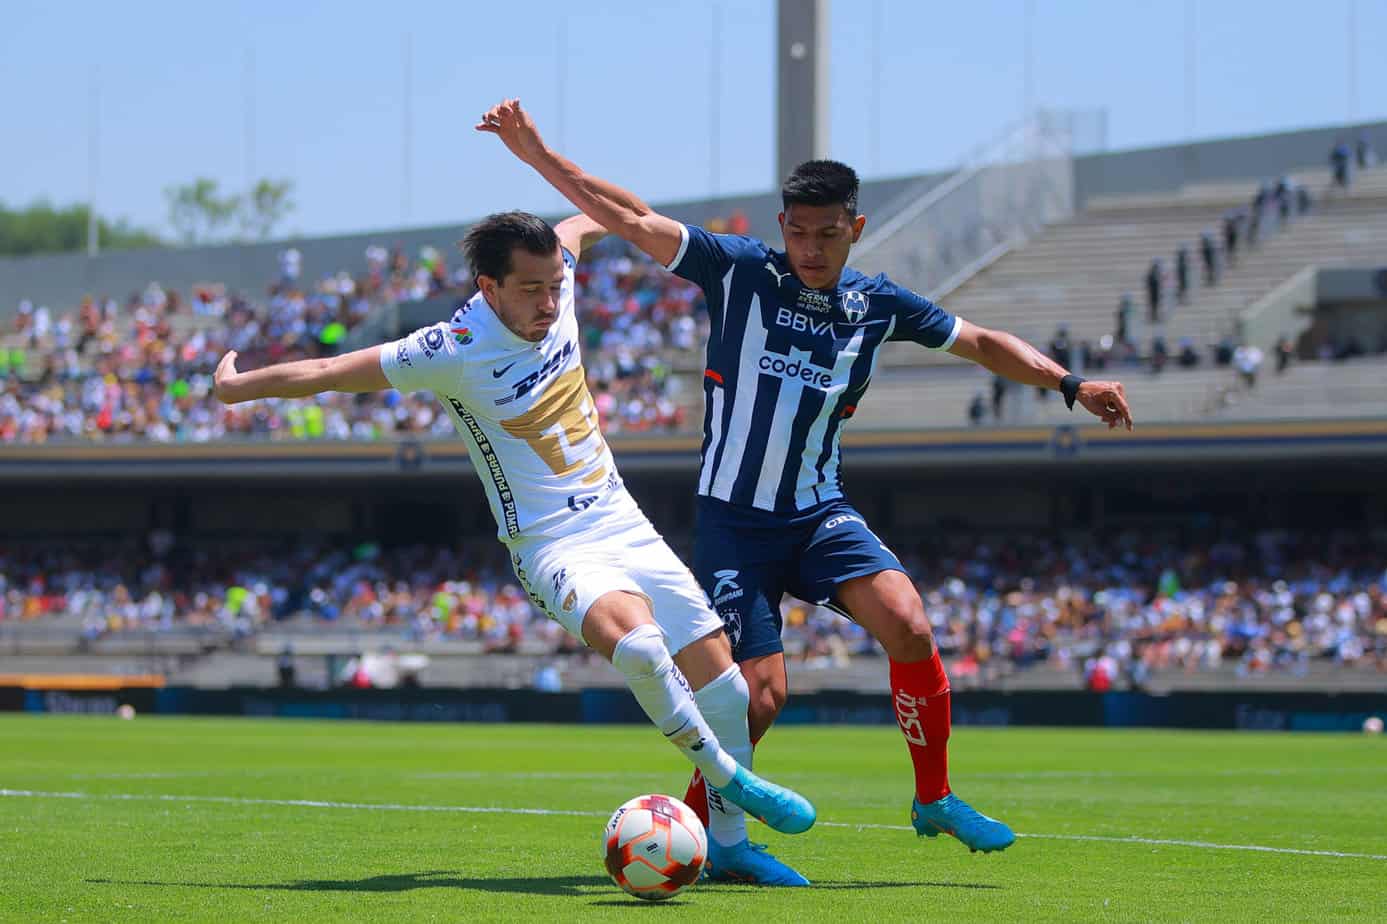 Monterrey vs. Pumas Preview and Free Pick